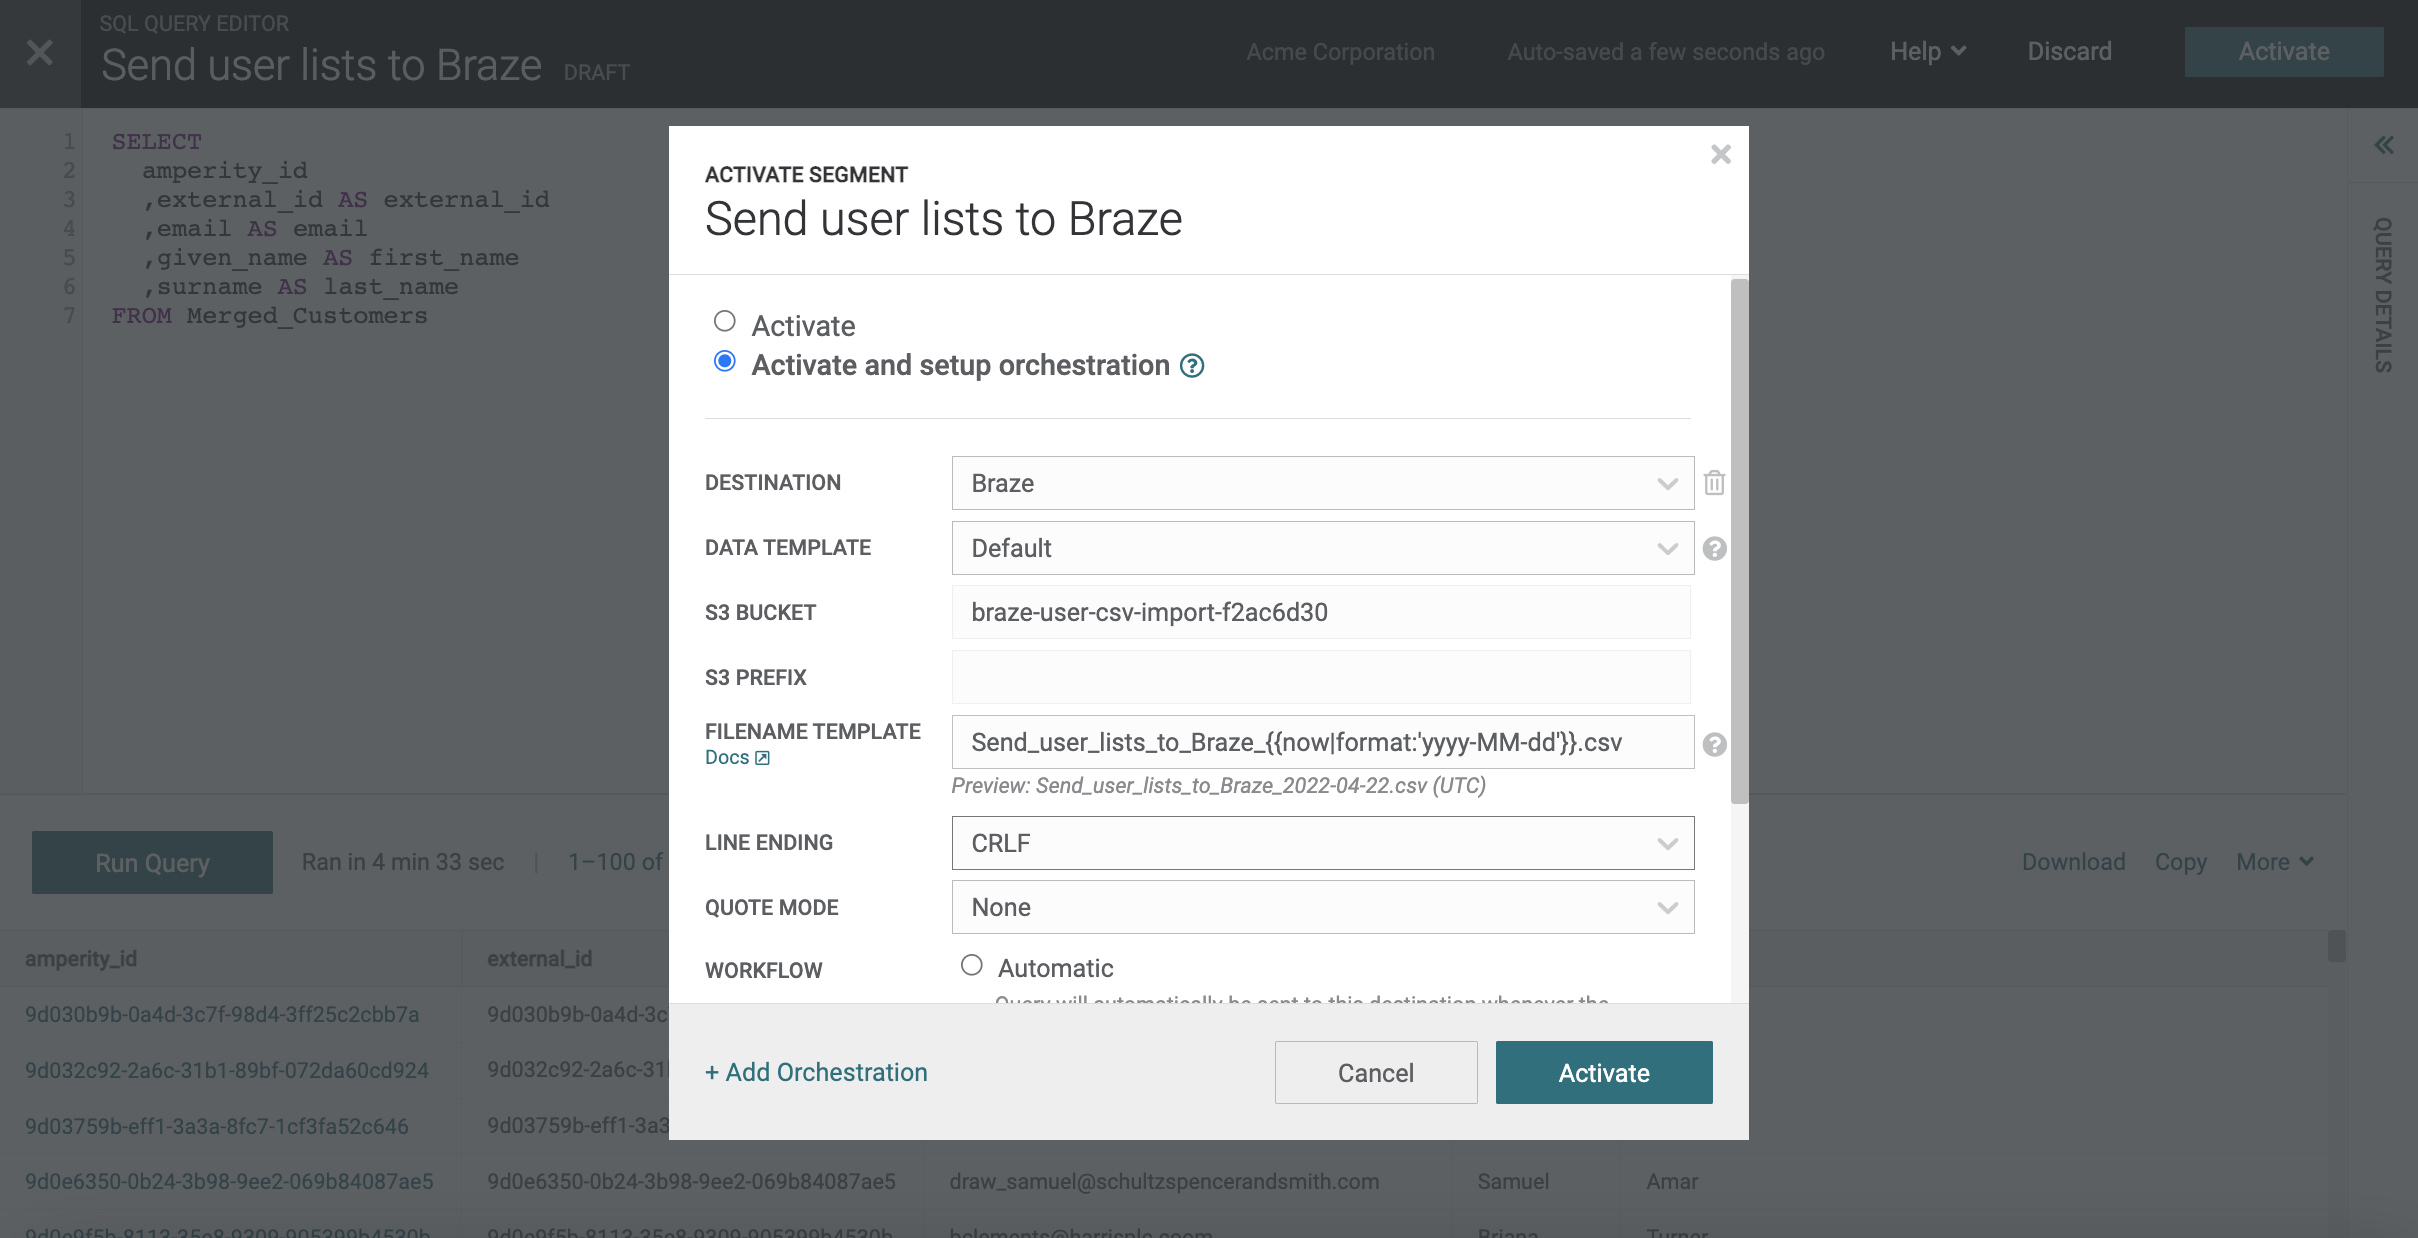 A summary of activating your Braze query, and then adding it to an orchestration that is configured for Braze.